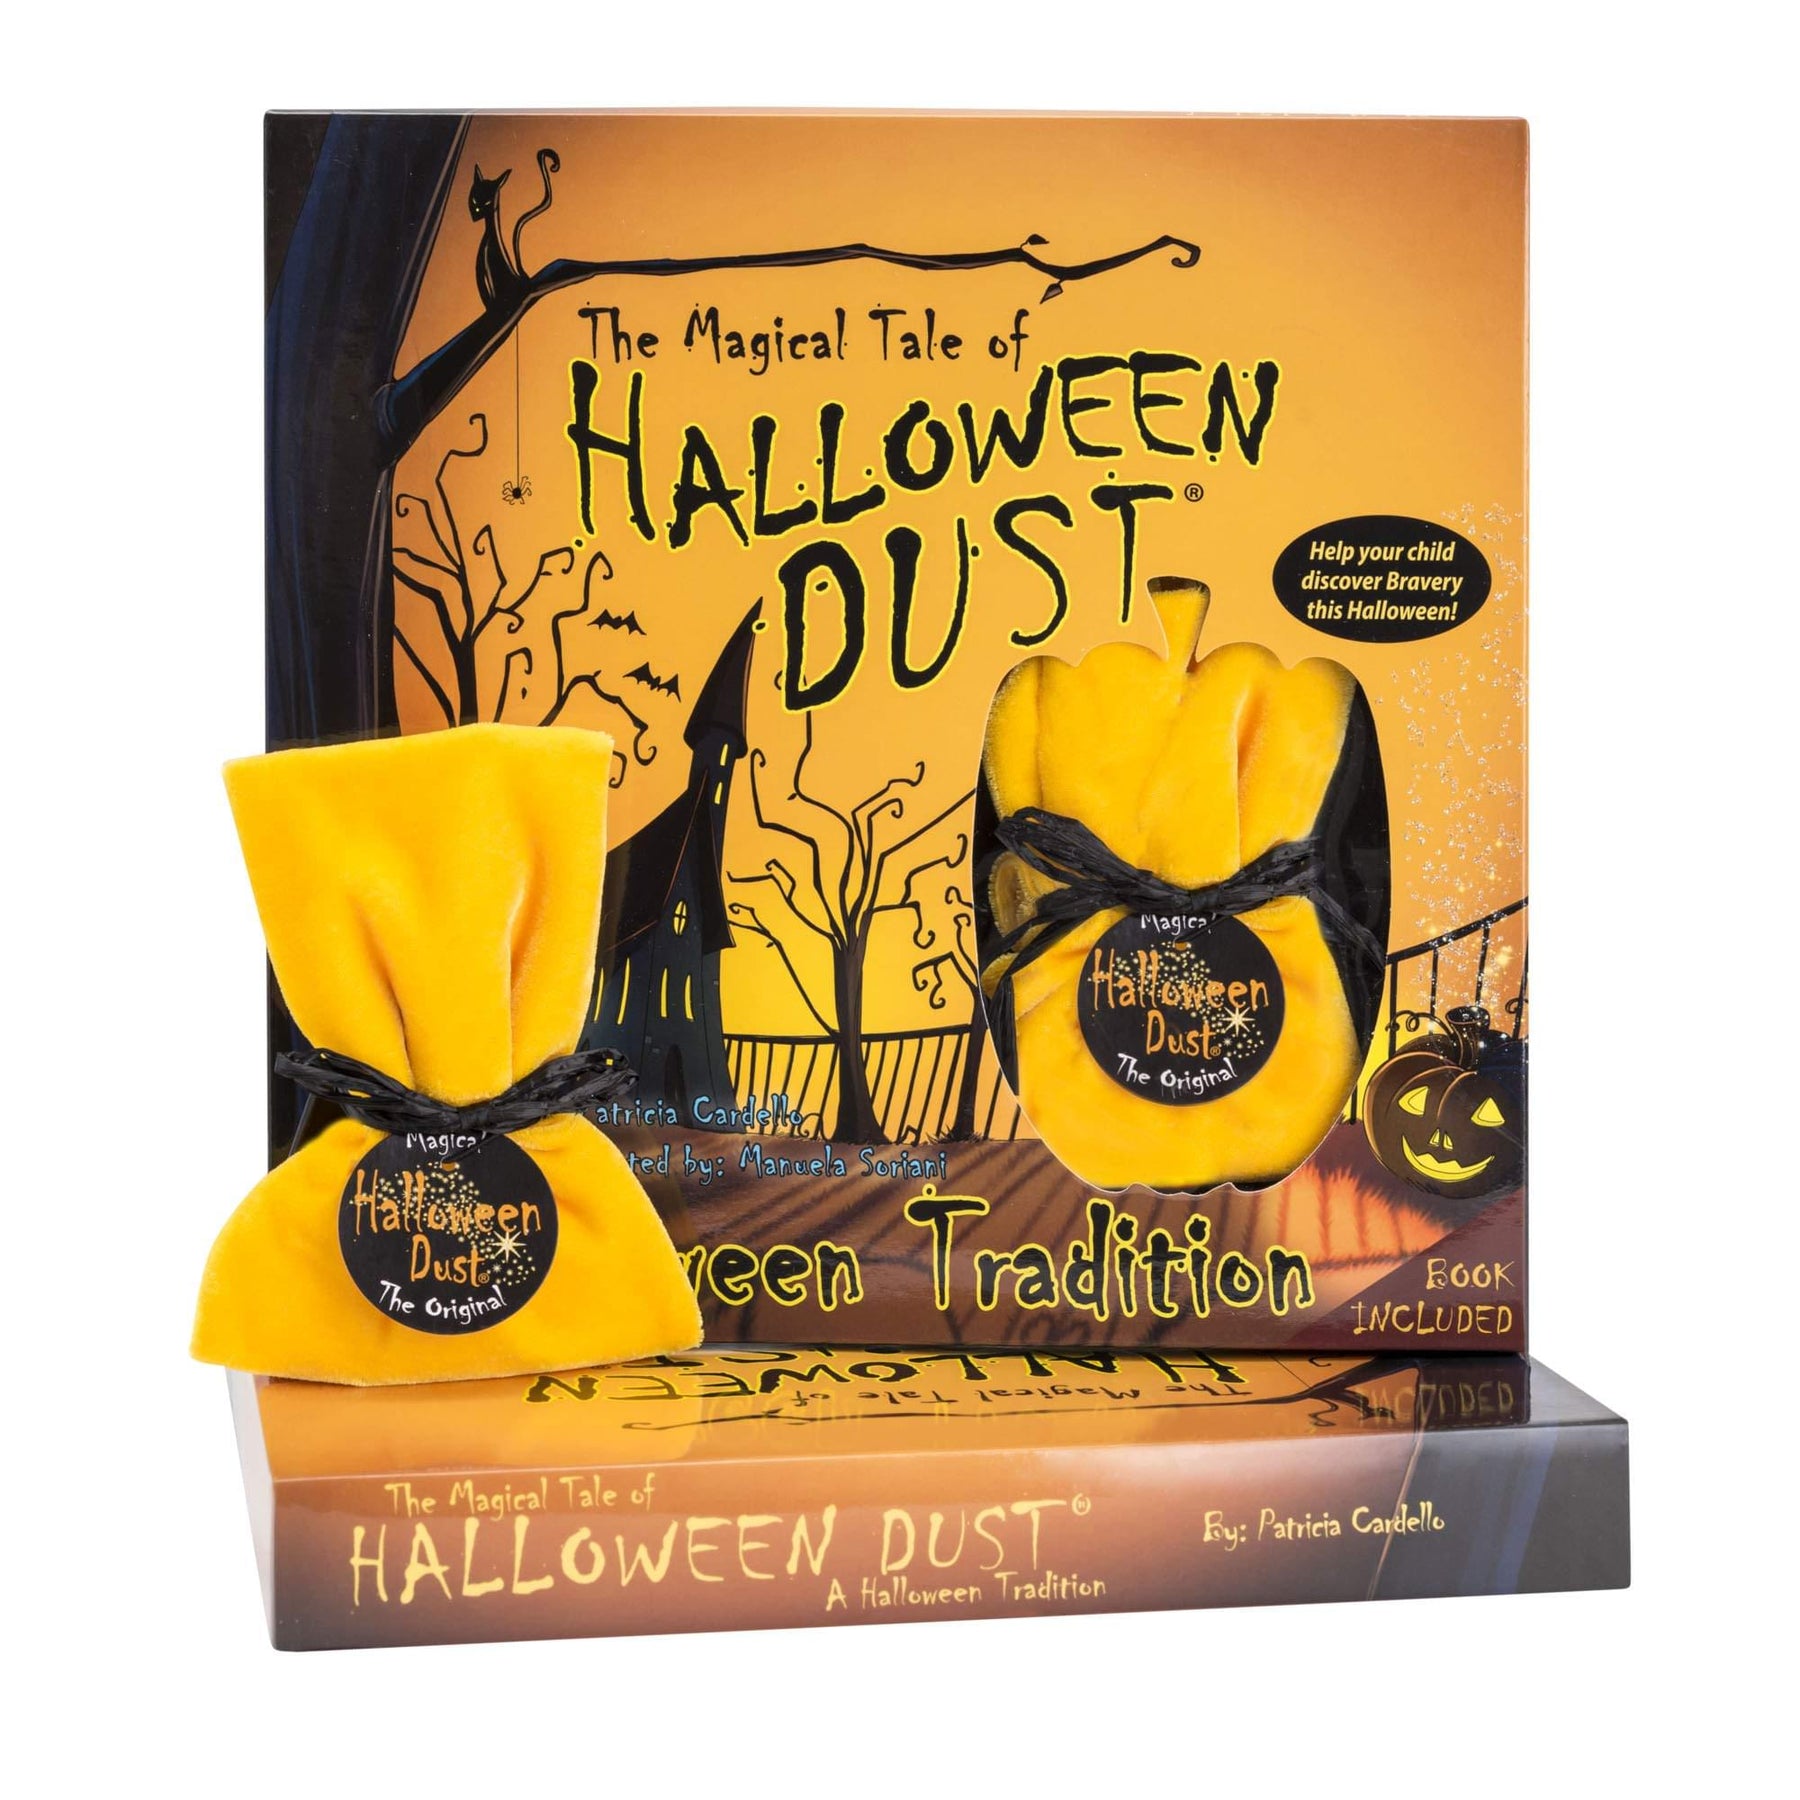 The Magical Tale of Halloween Dust Hardcover Book & Halloween Dust